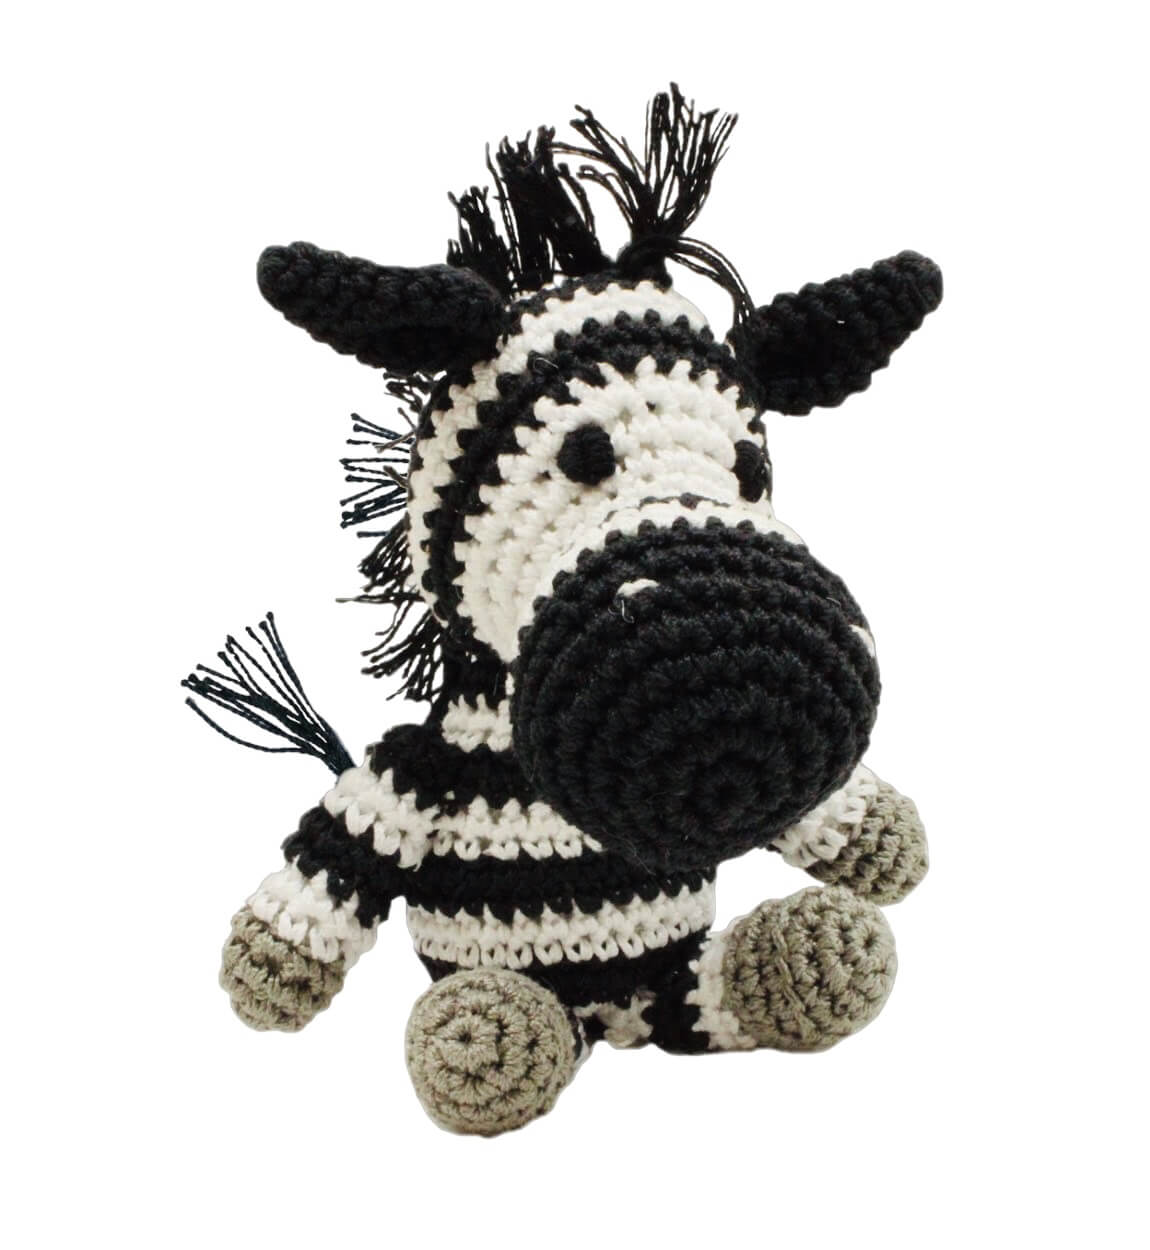 Knit Knacks &quot;Zsa Zsa the Zebra&quot; handmade organic cotton dog toy. Black and white zebra with a fringed mane and tail.